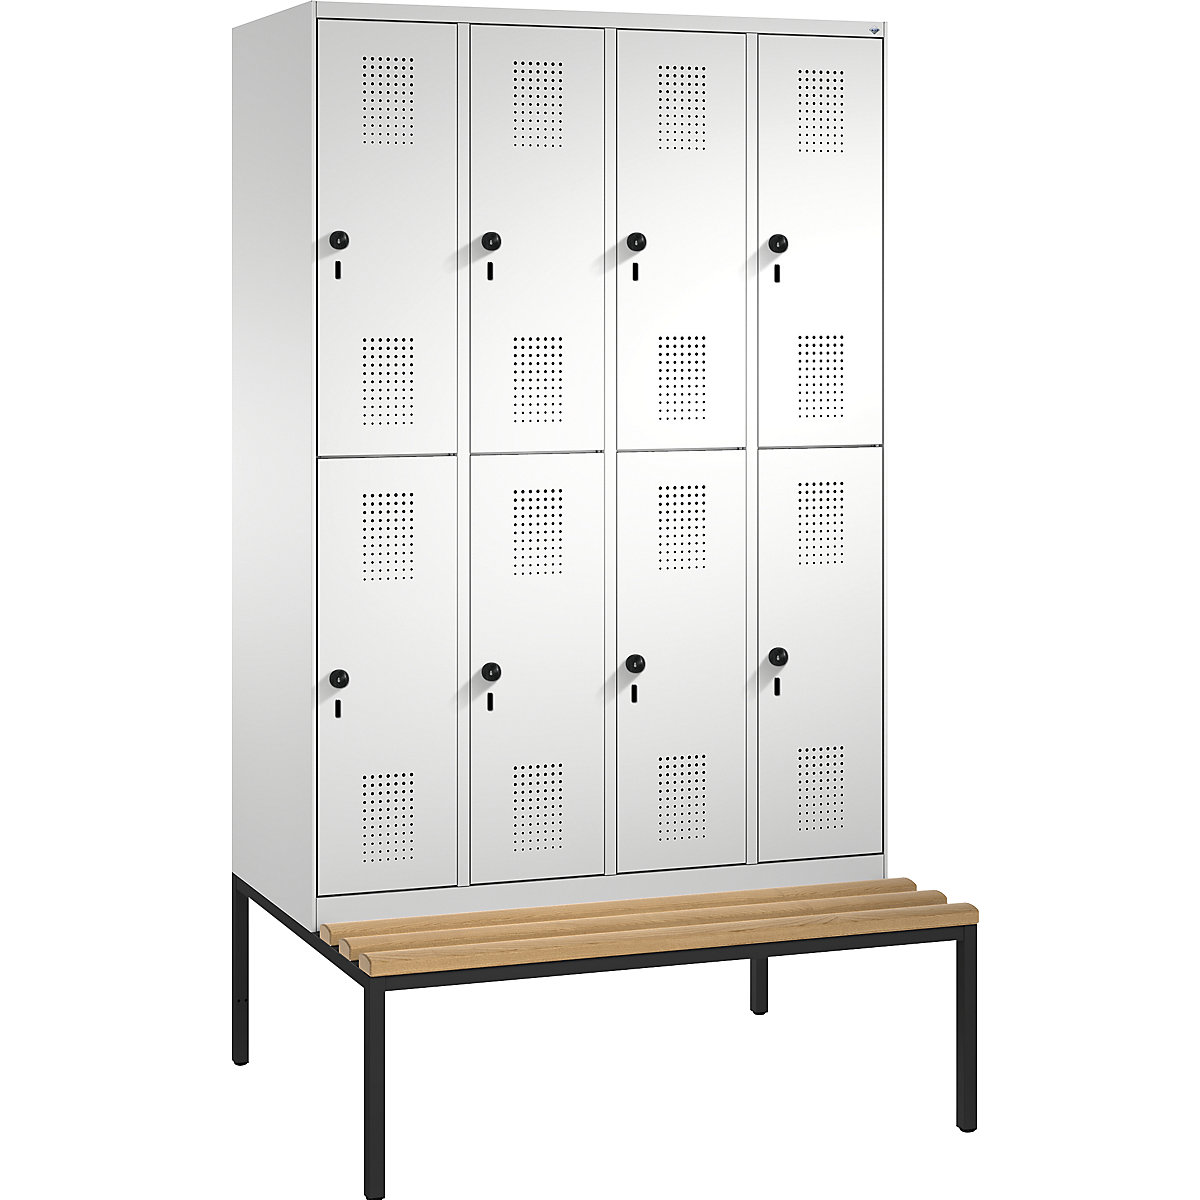 EVOLO cloakroom locker, double tier, with bench – C+P, 4 compartments, 2 shelf compartments each, compartment width 300 mm, light grey-7